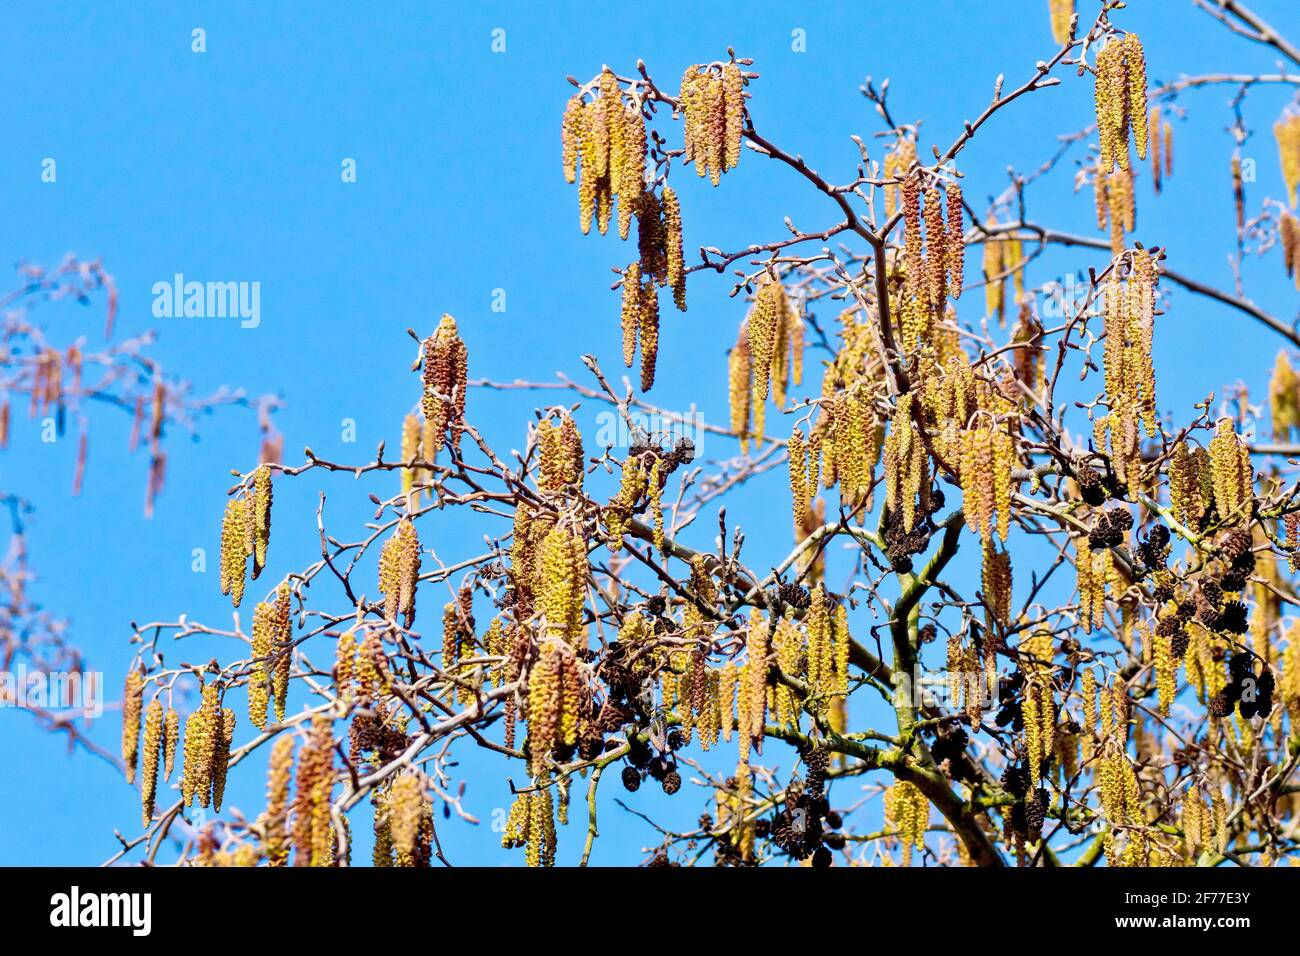 Alder catkins (alnus glutinosa), showing a mass of male catkins growing with last year's seed cones on the high branches of a tree against a blue sky. Stock Photo